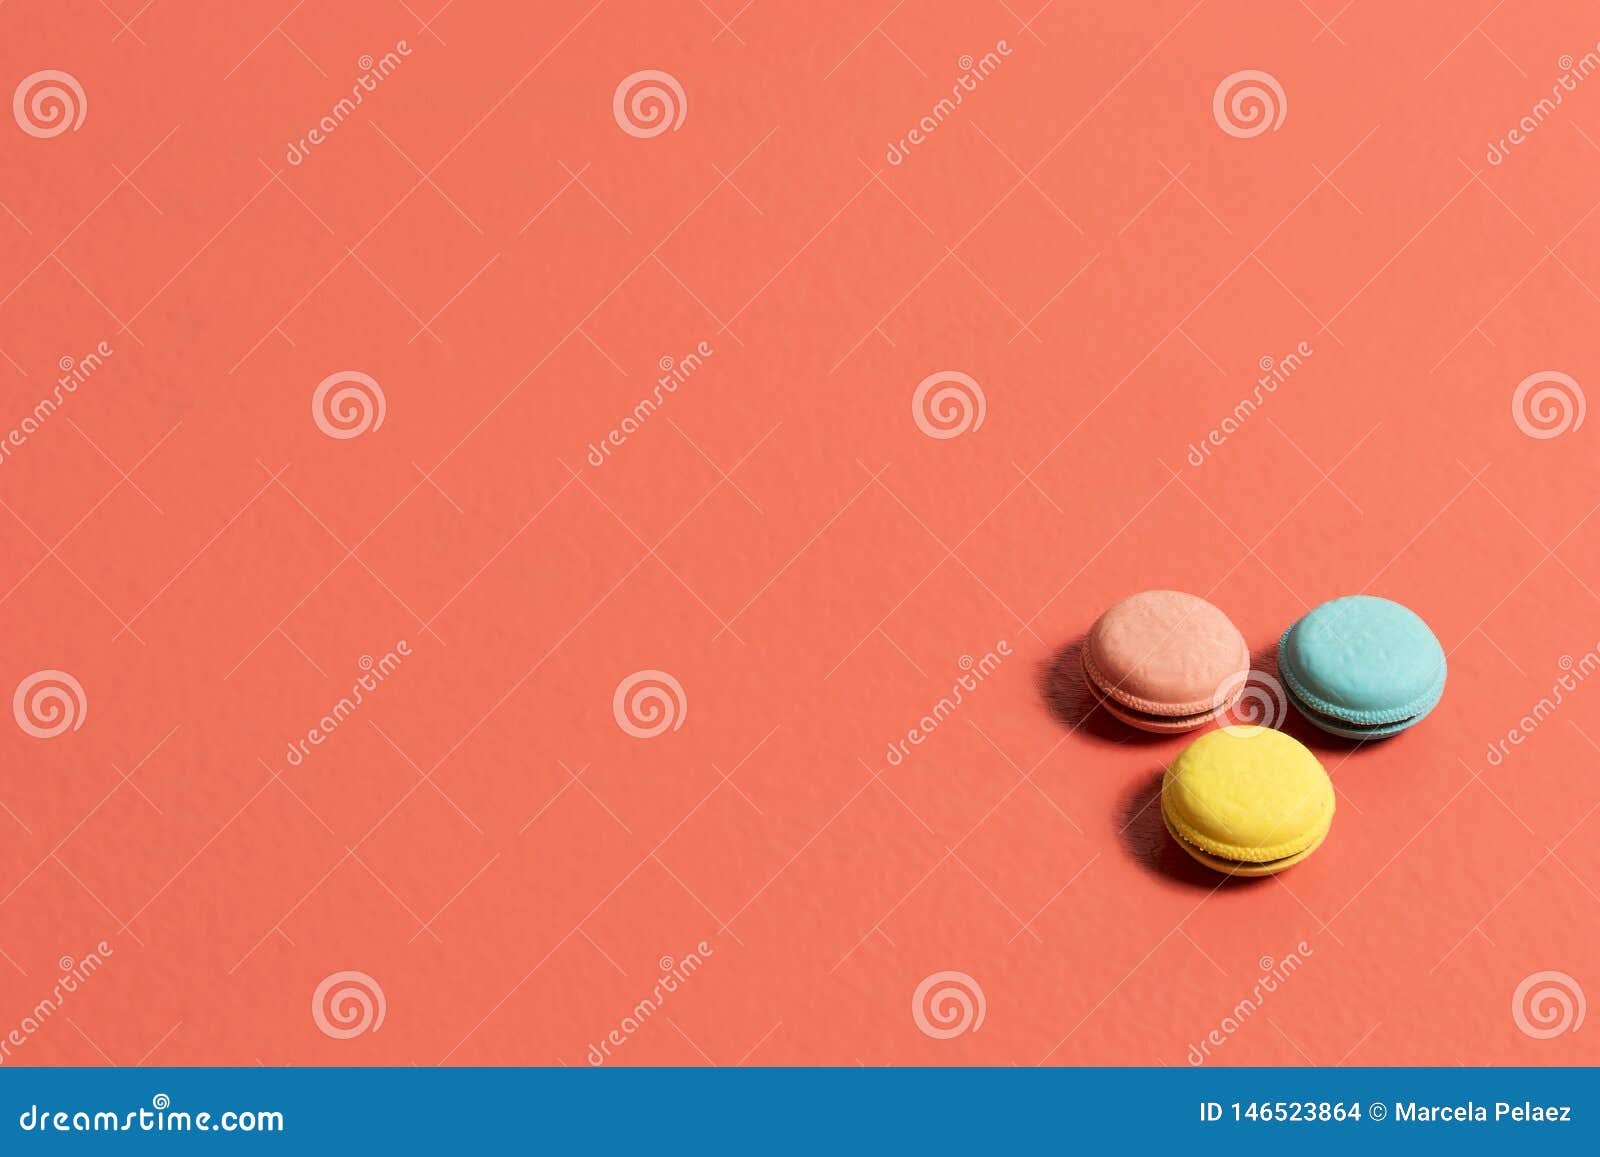 circular erasers in pink blue and yellow colors on a coral table